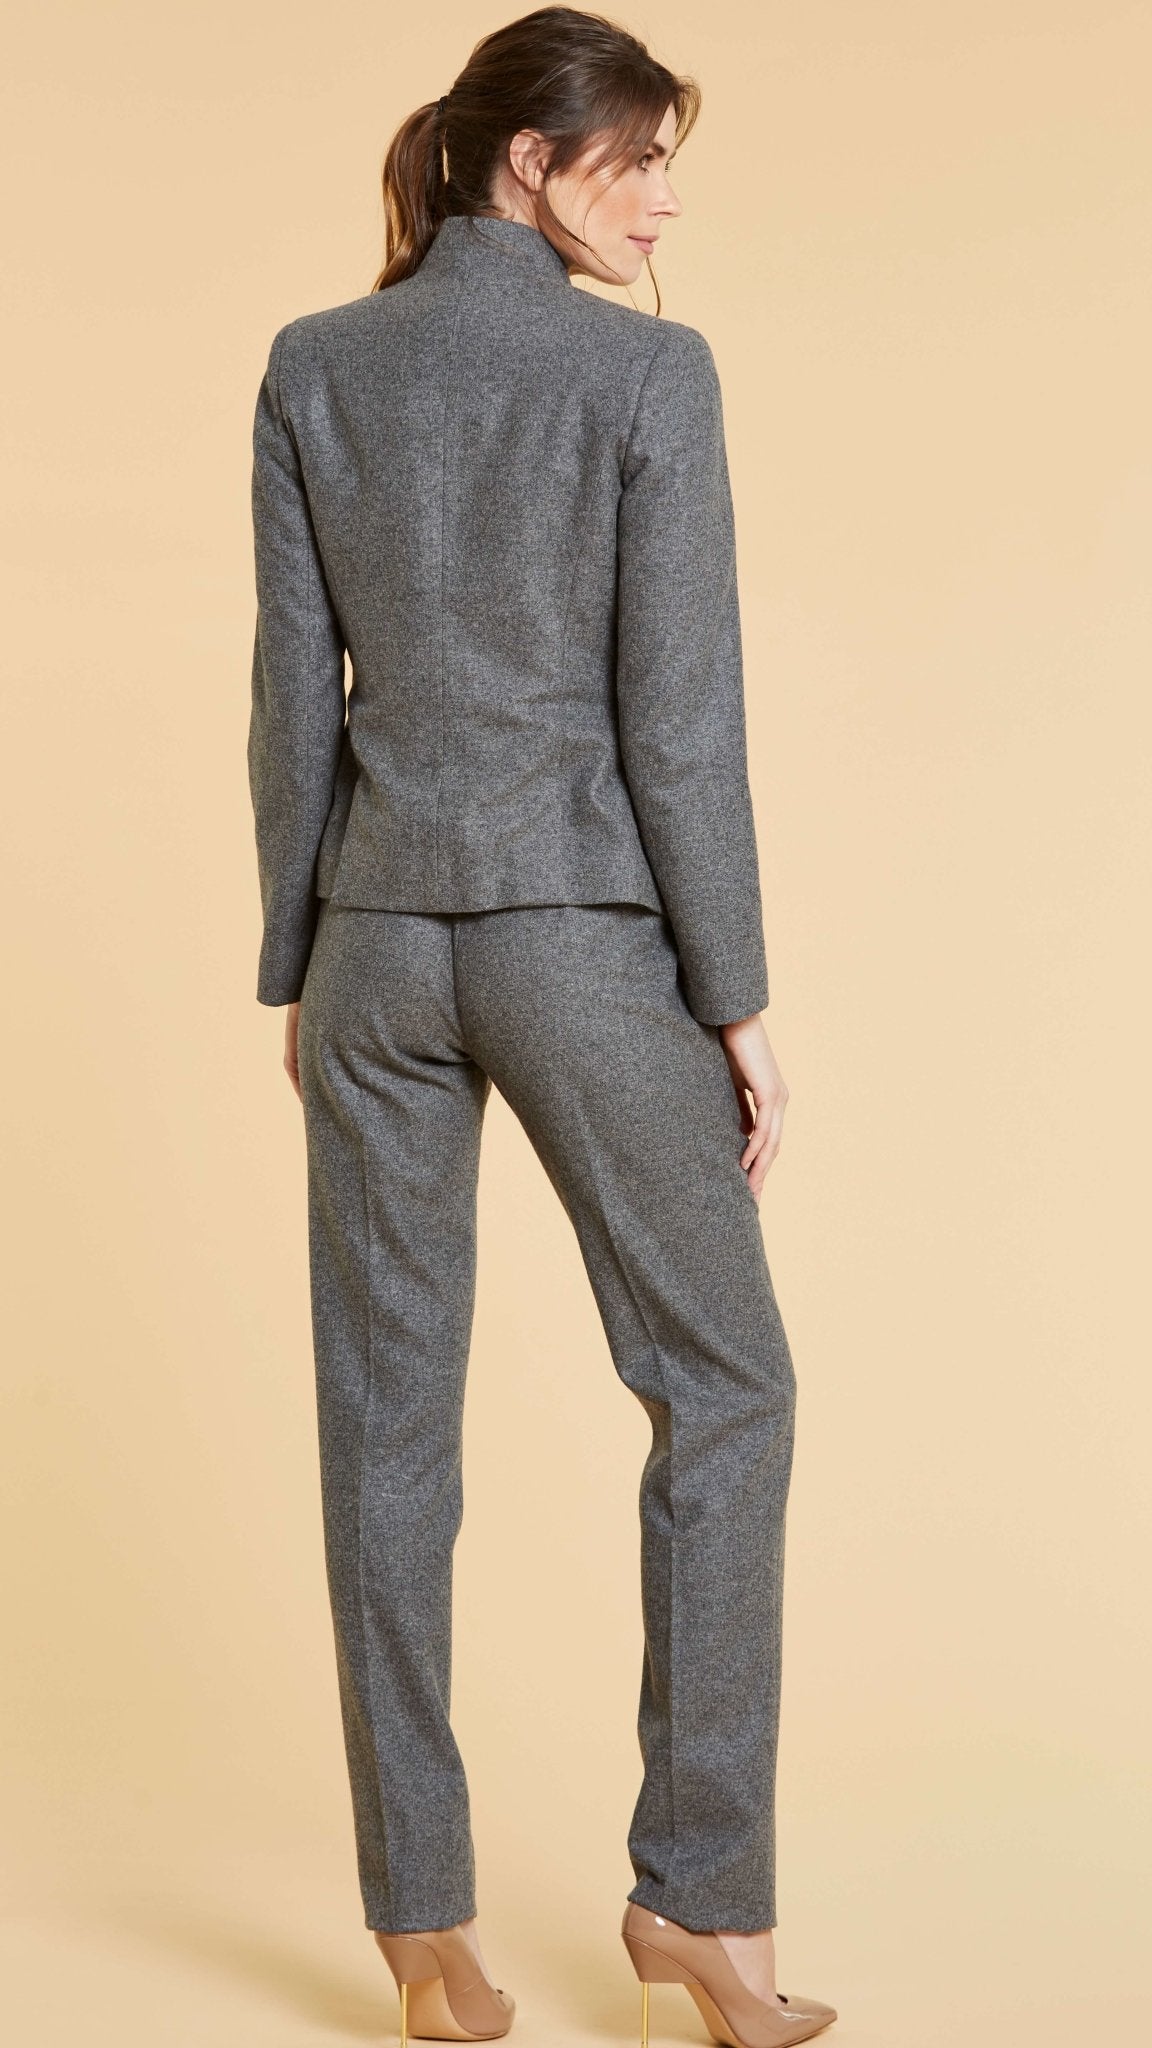 Grey Lambs Wool Suit - The Clothing LoungeSinclair London